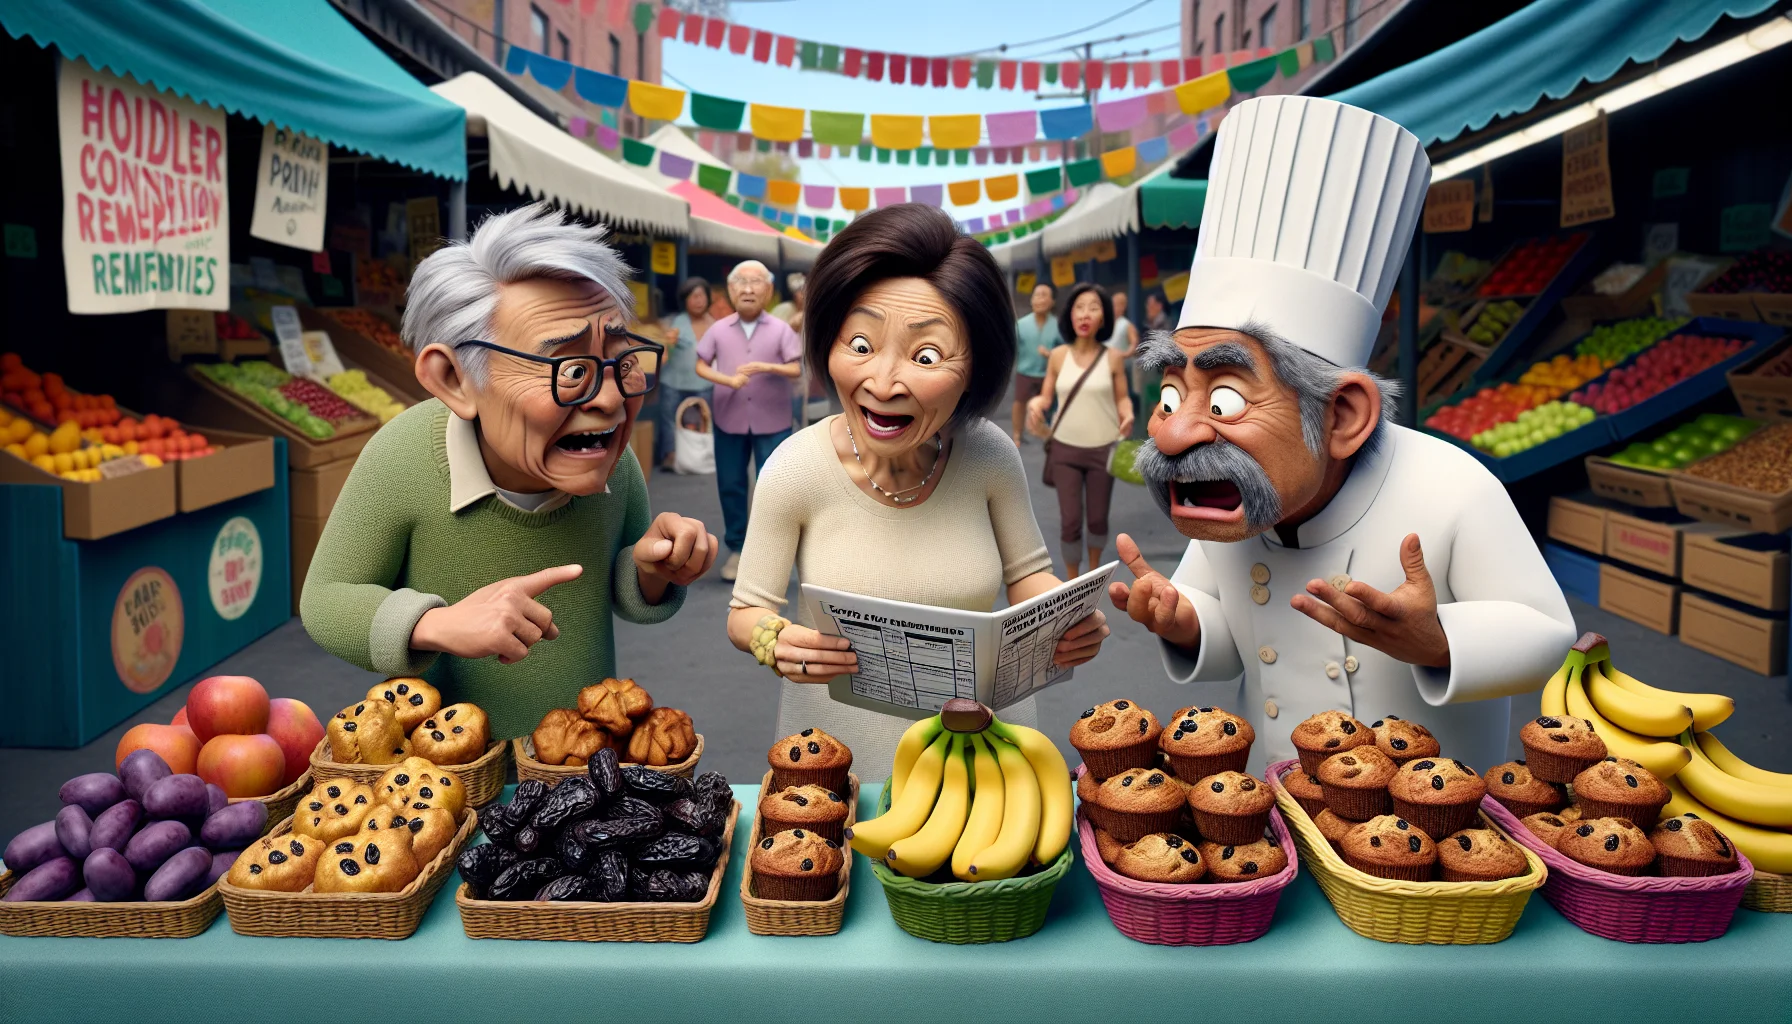 Craft a humorous and realistic scene taking place in a bustling farmers' market. The main focus should be on a variety of high-fiber foods ideal for toddlers, like bananas, prunes, and whole grain foods, displayed attractively in colorful baskets. Show an enthusiastic, elderly Asian woman animatedly explaining the benefits of these foods to a perplexed Middle-Eastern grandfather, who is holding a list named 'Toddler Constipation Remedies'. Nearby, an elderly Caucasian man, complete with a chef's hat, is seen taking a comedic tasting of an oversized bran muffin, much to the amusement of onlookers.